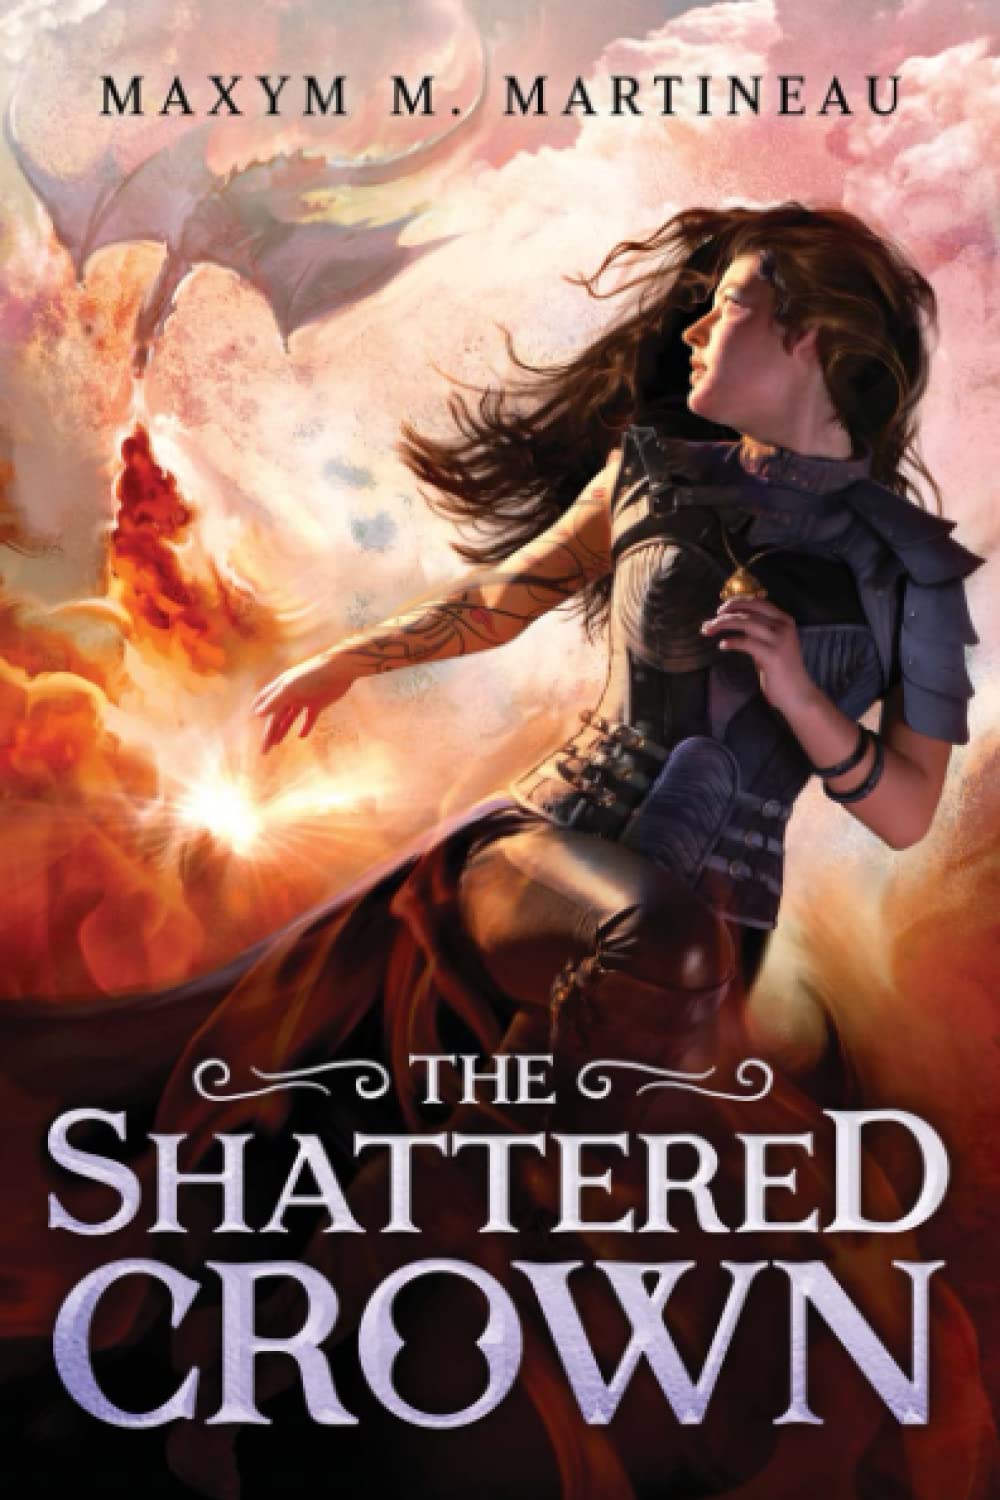 Cover of “The Shattered Crown” by Maxym M. Martineau